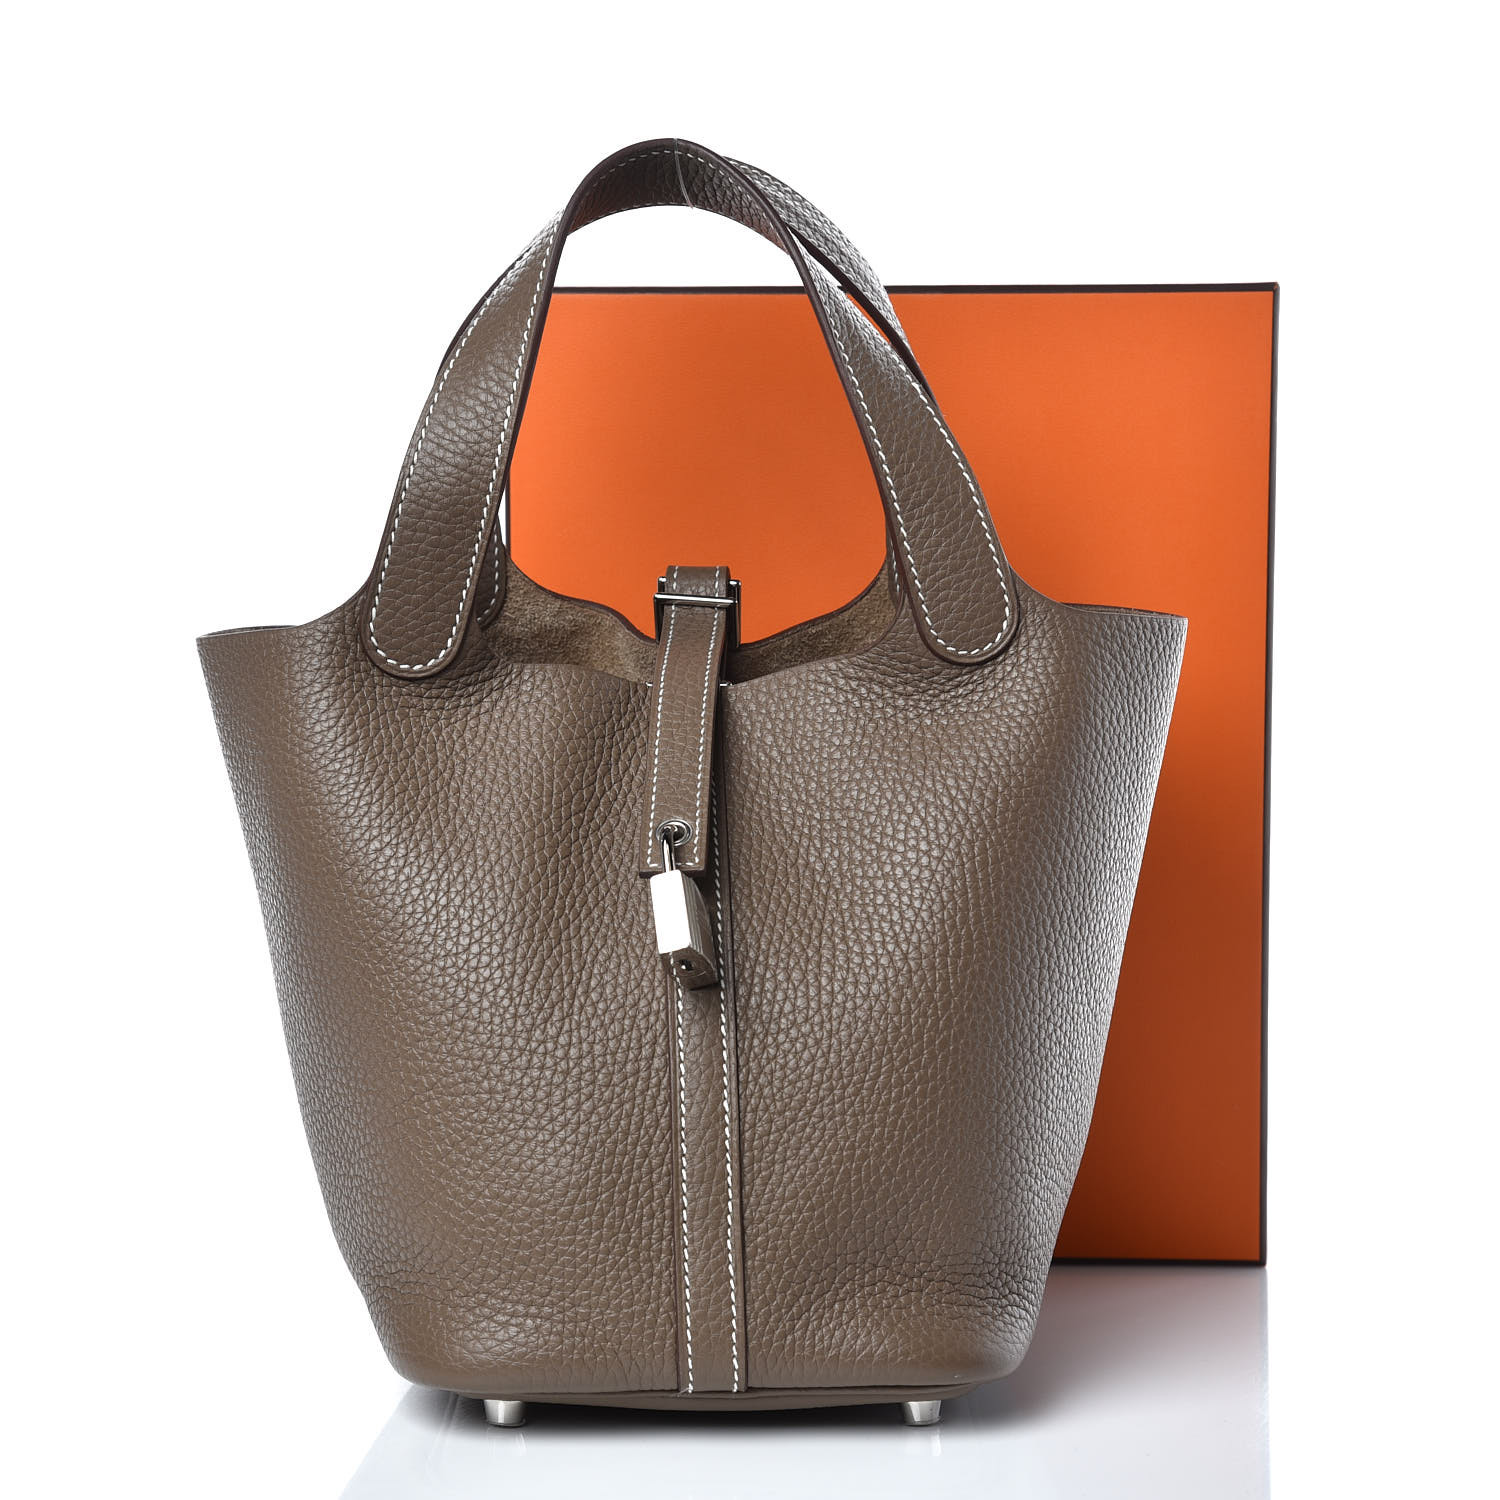 Hermes Picotin 18 Etoupe - www.inf-inet.com